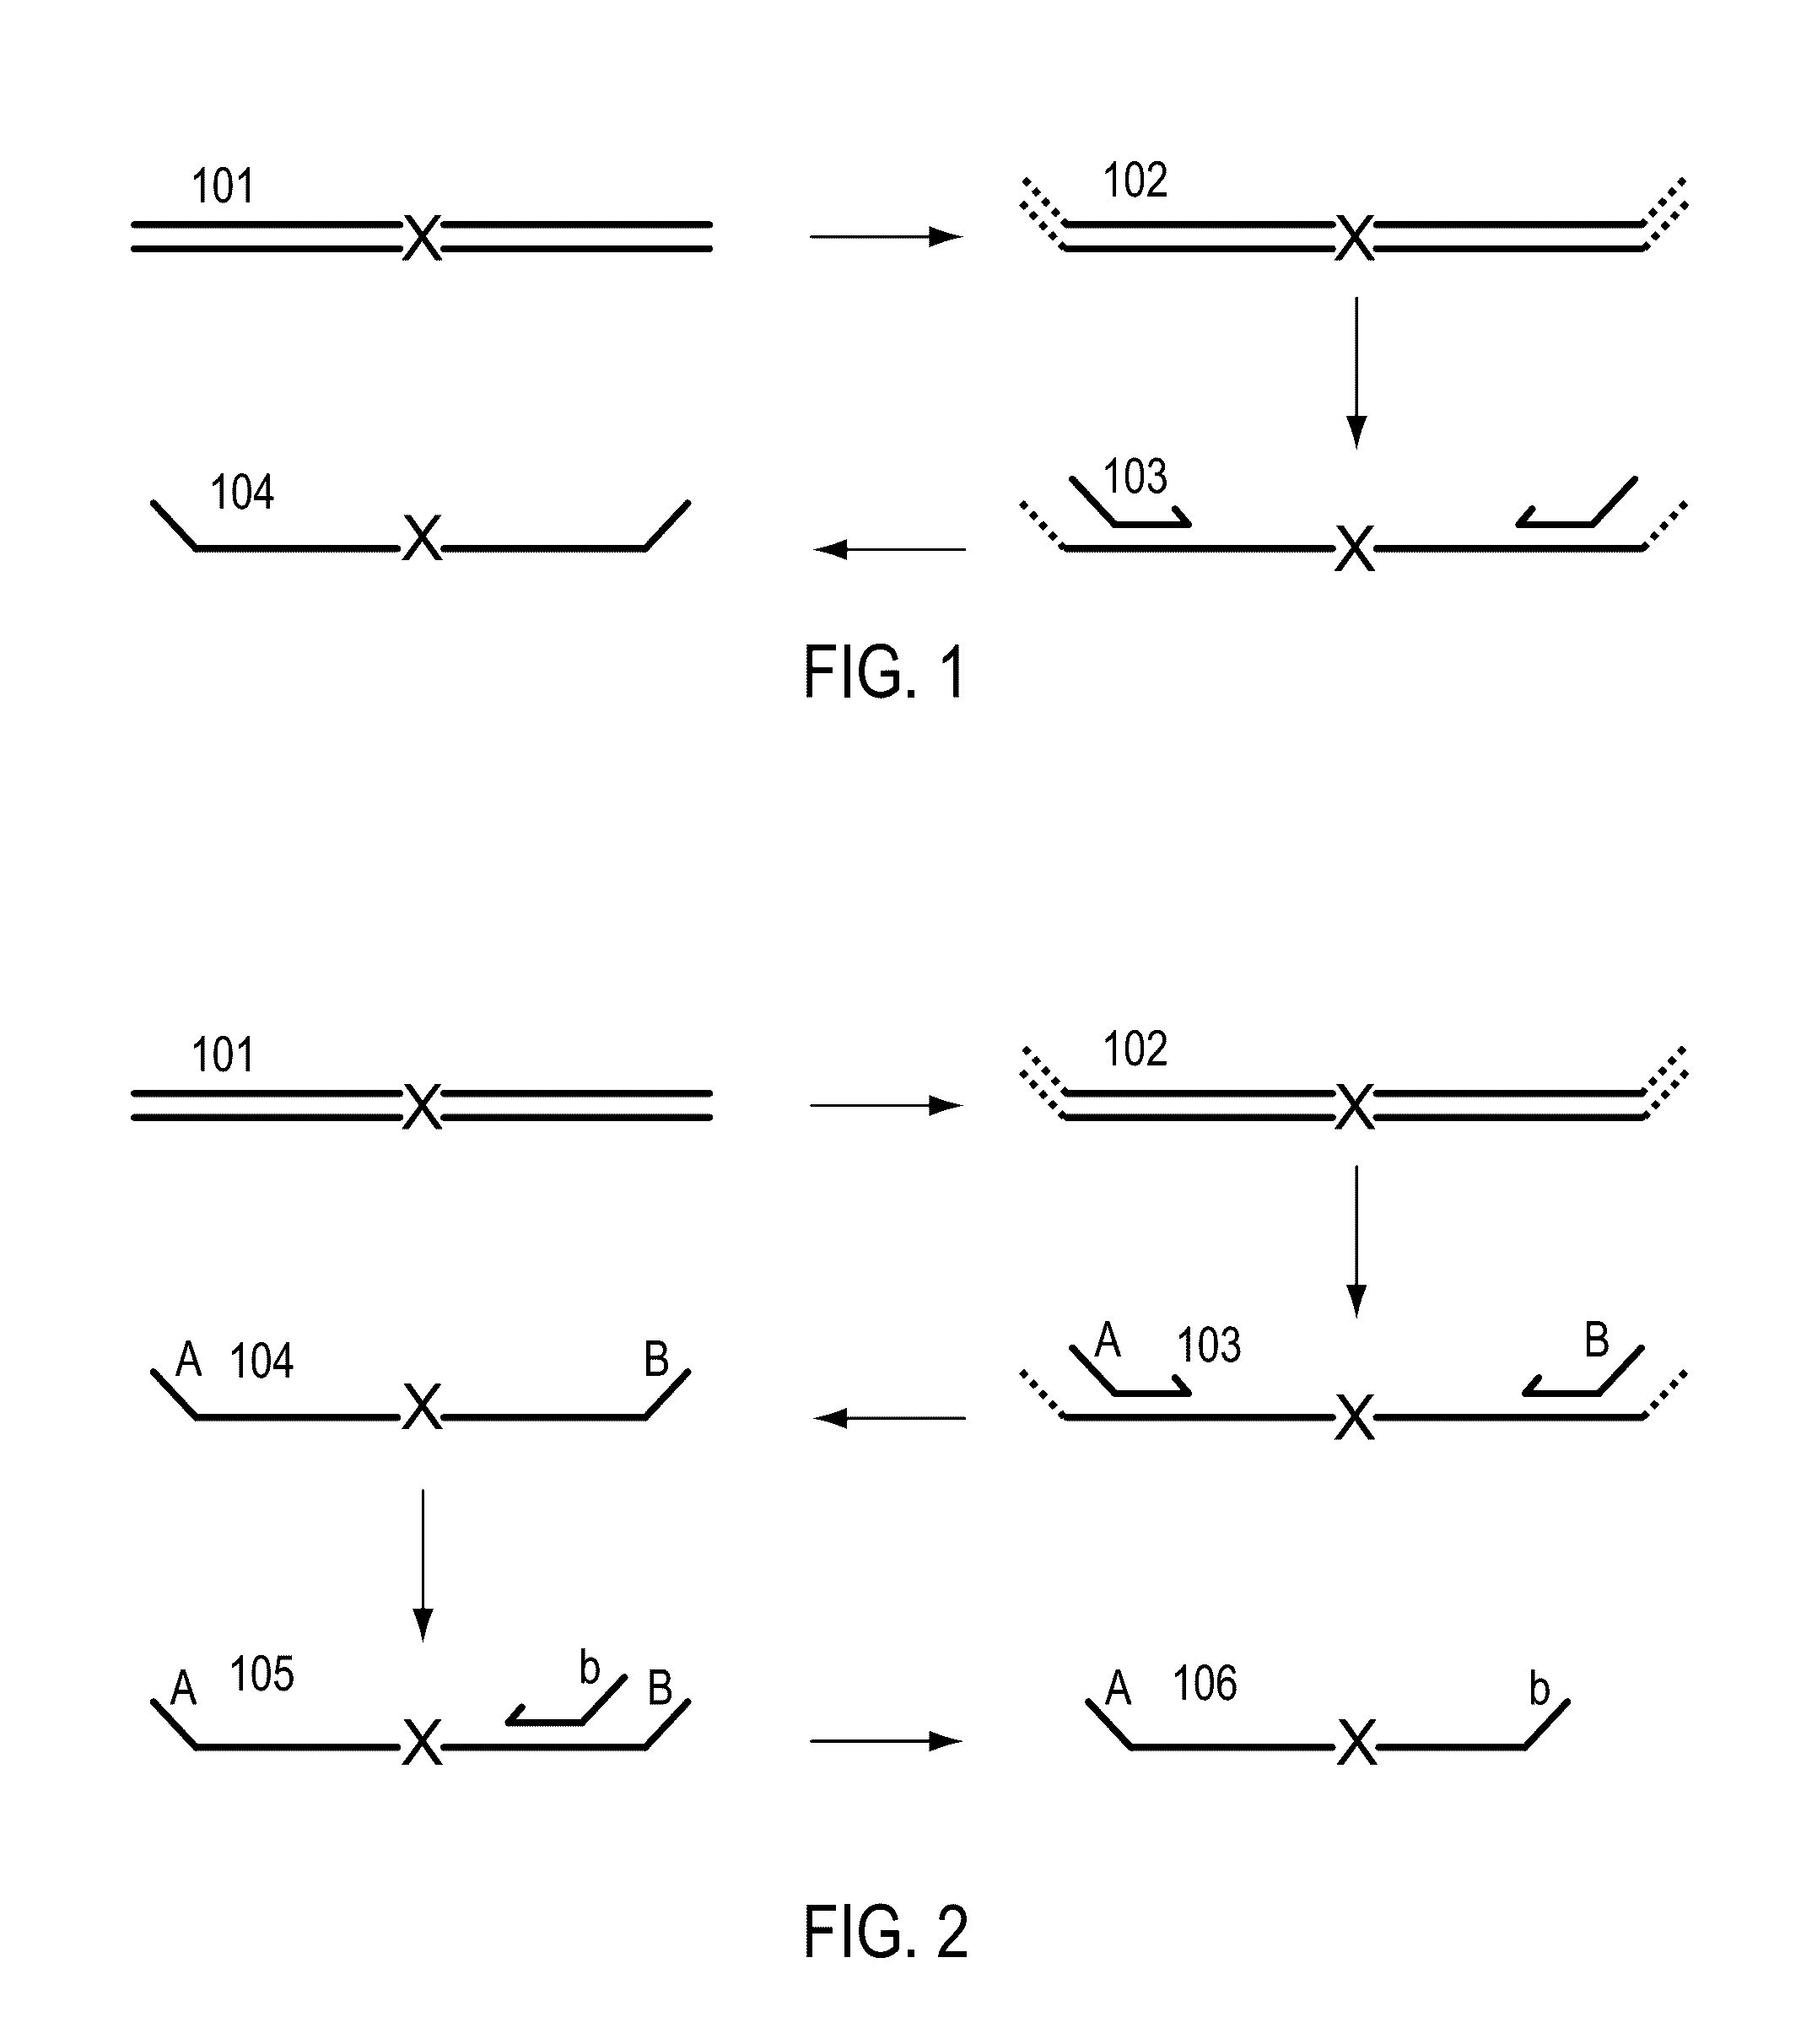 Methods for simultaneous amplification of target loci